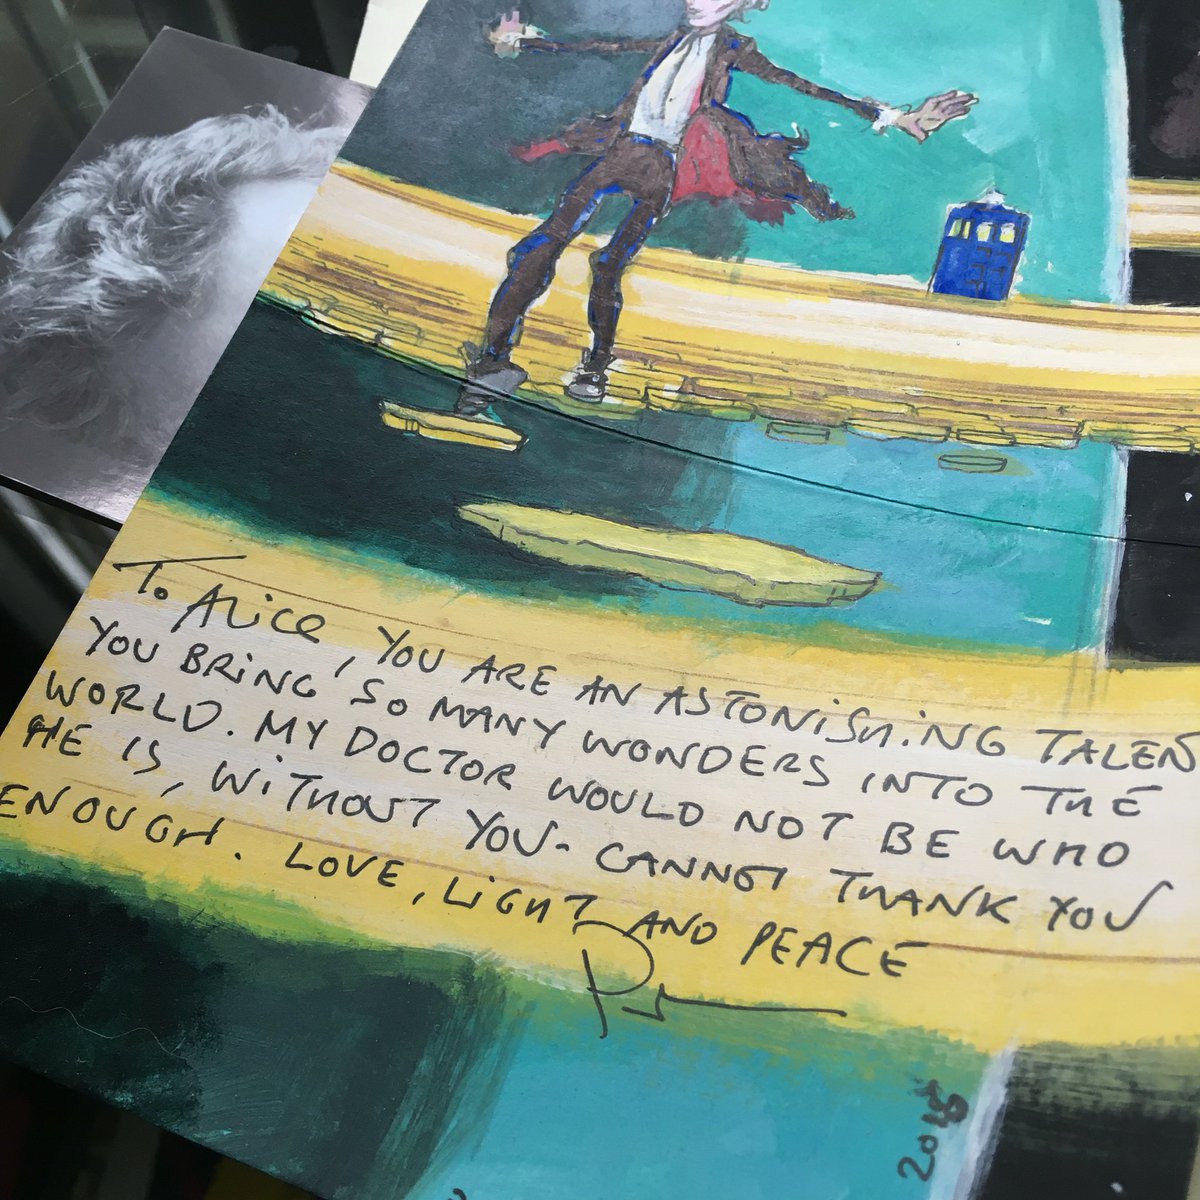 GUYS PETER CAPALDI LIKED MY ART SO MUCH HE PERSONALLY SENT ME A LETTER!! AND A DRAWING ?❤️ WHAT A BEAUTIFUL PERSON 